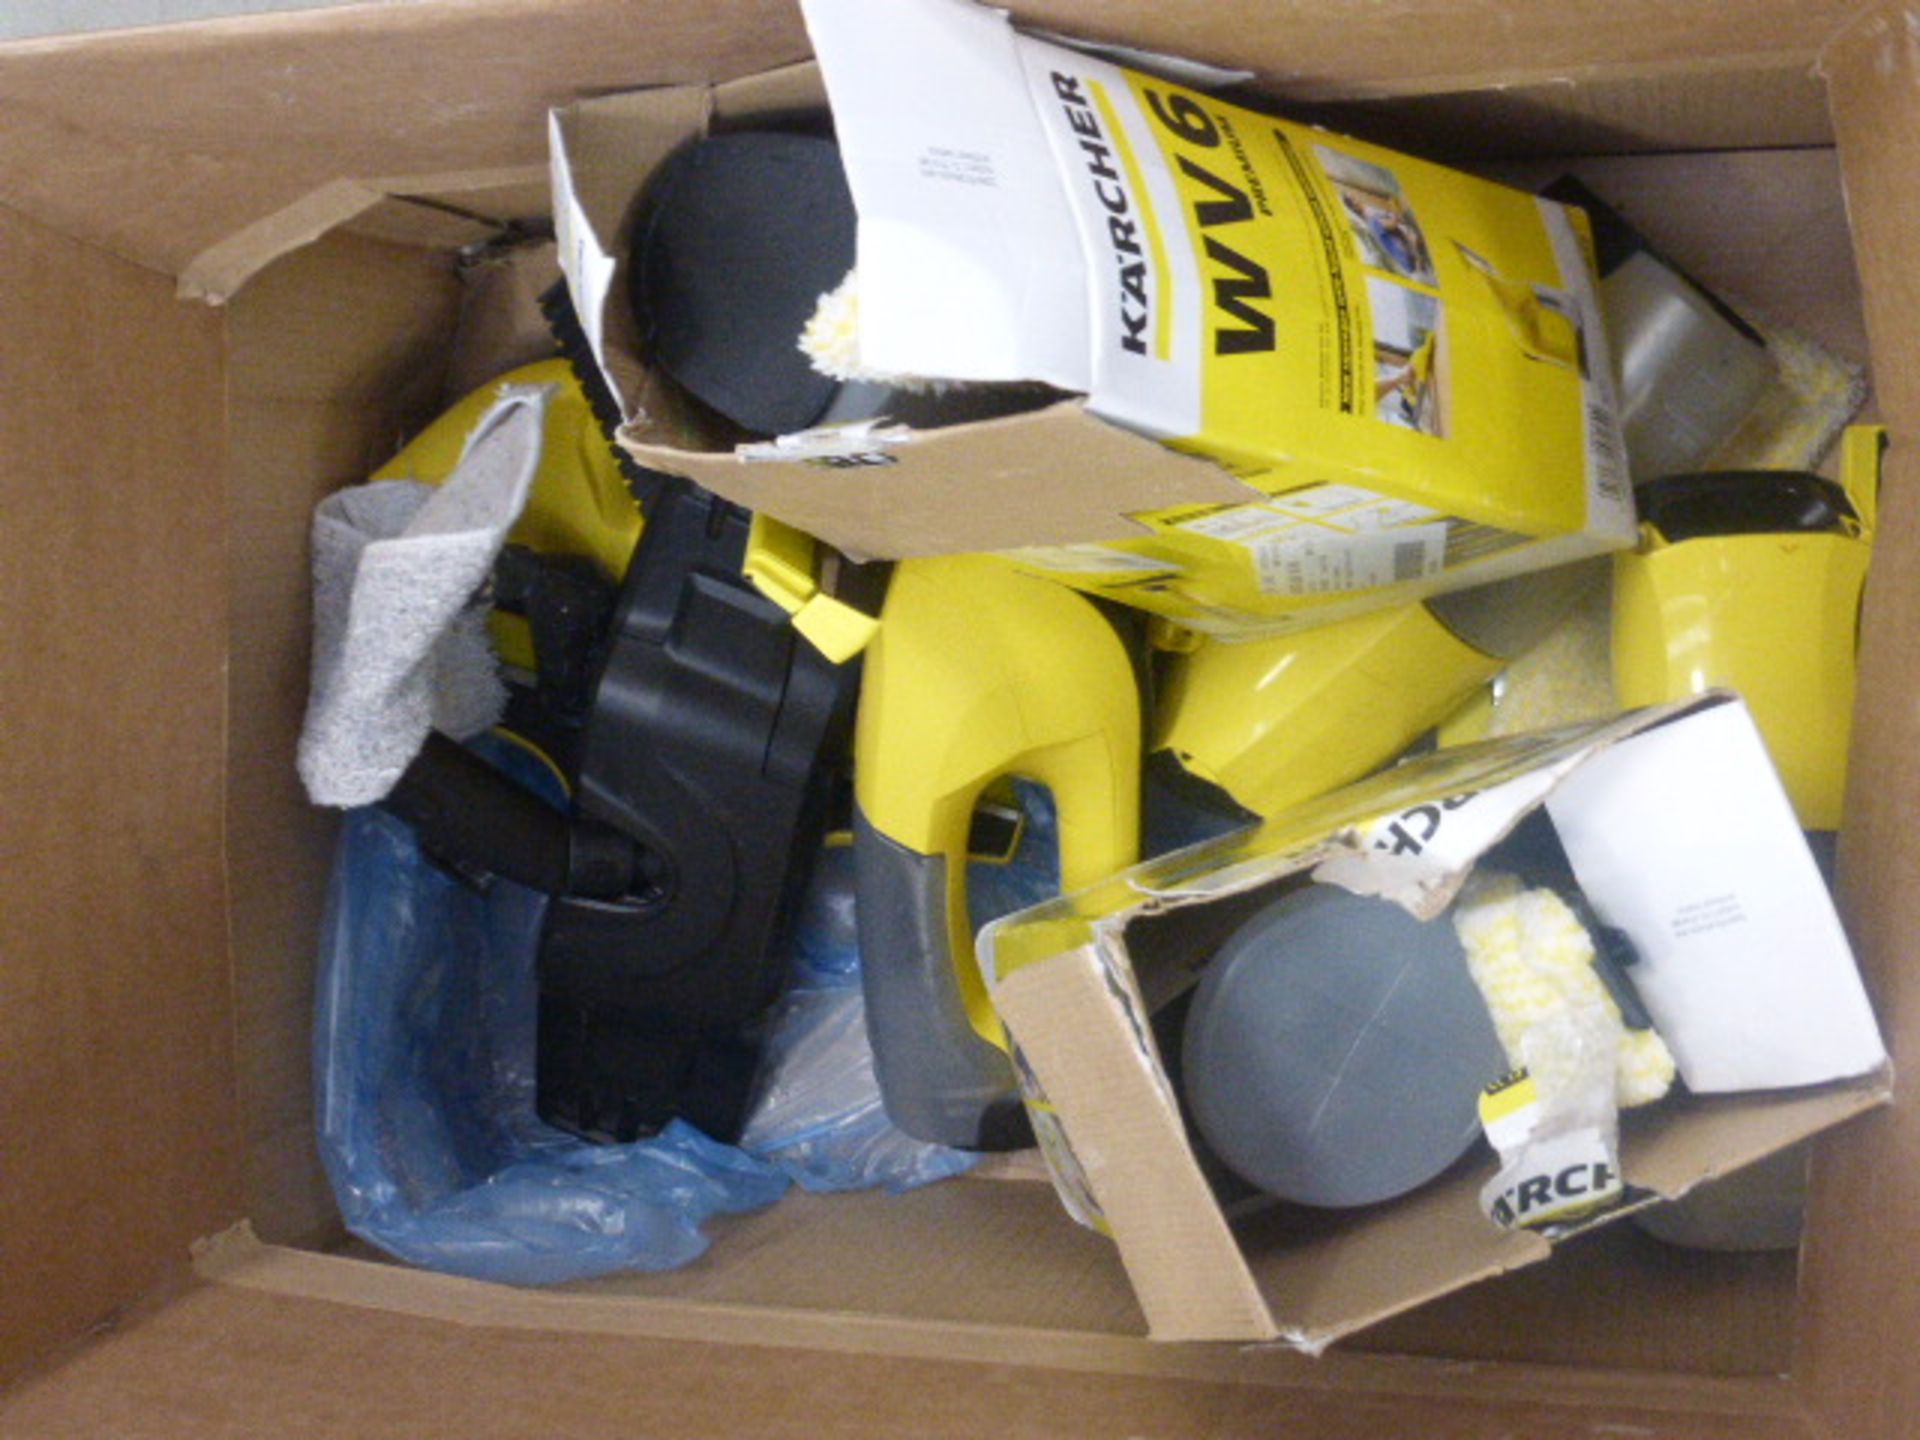 Box containing 3 Karcher window vacs and spares